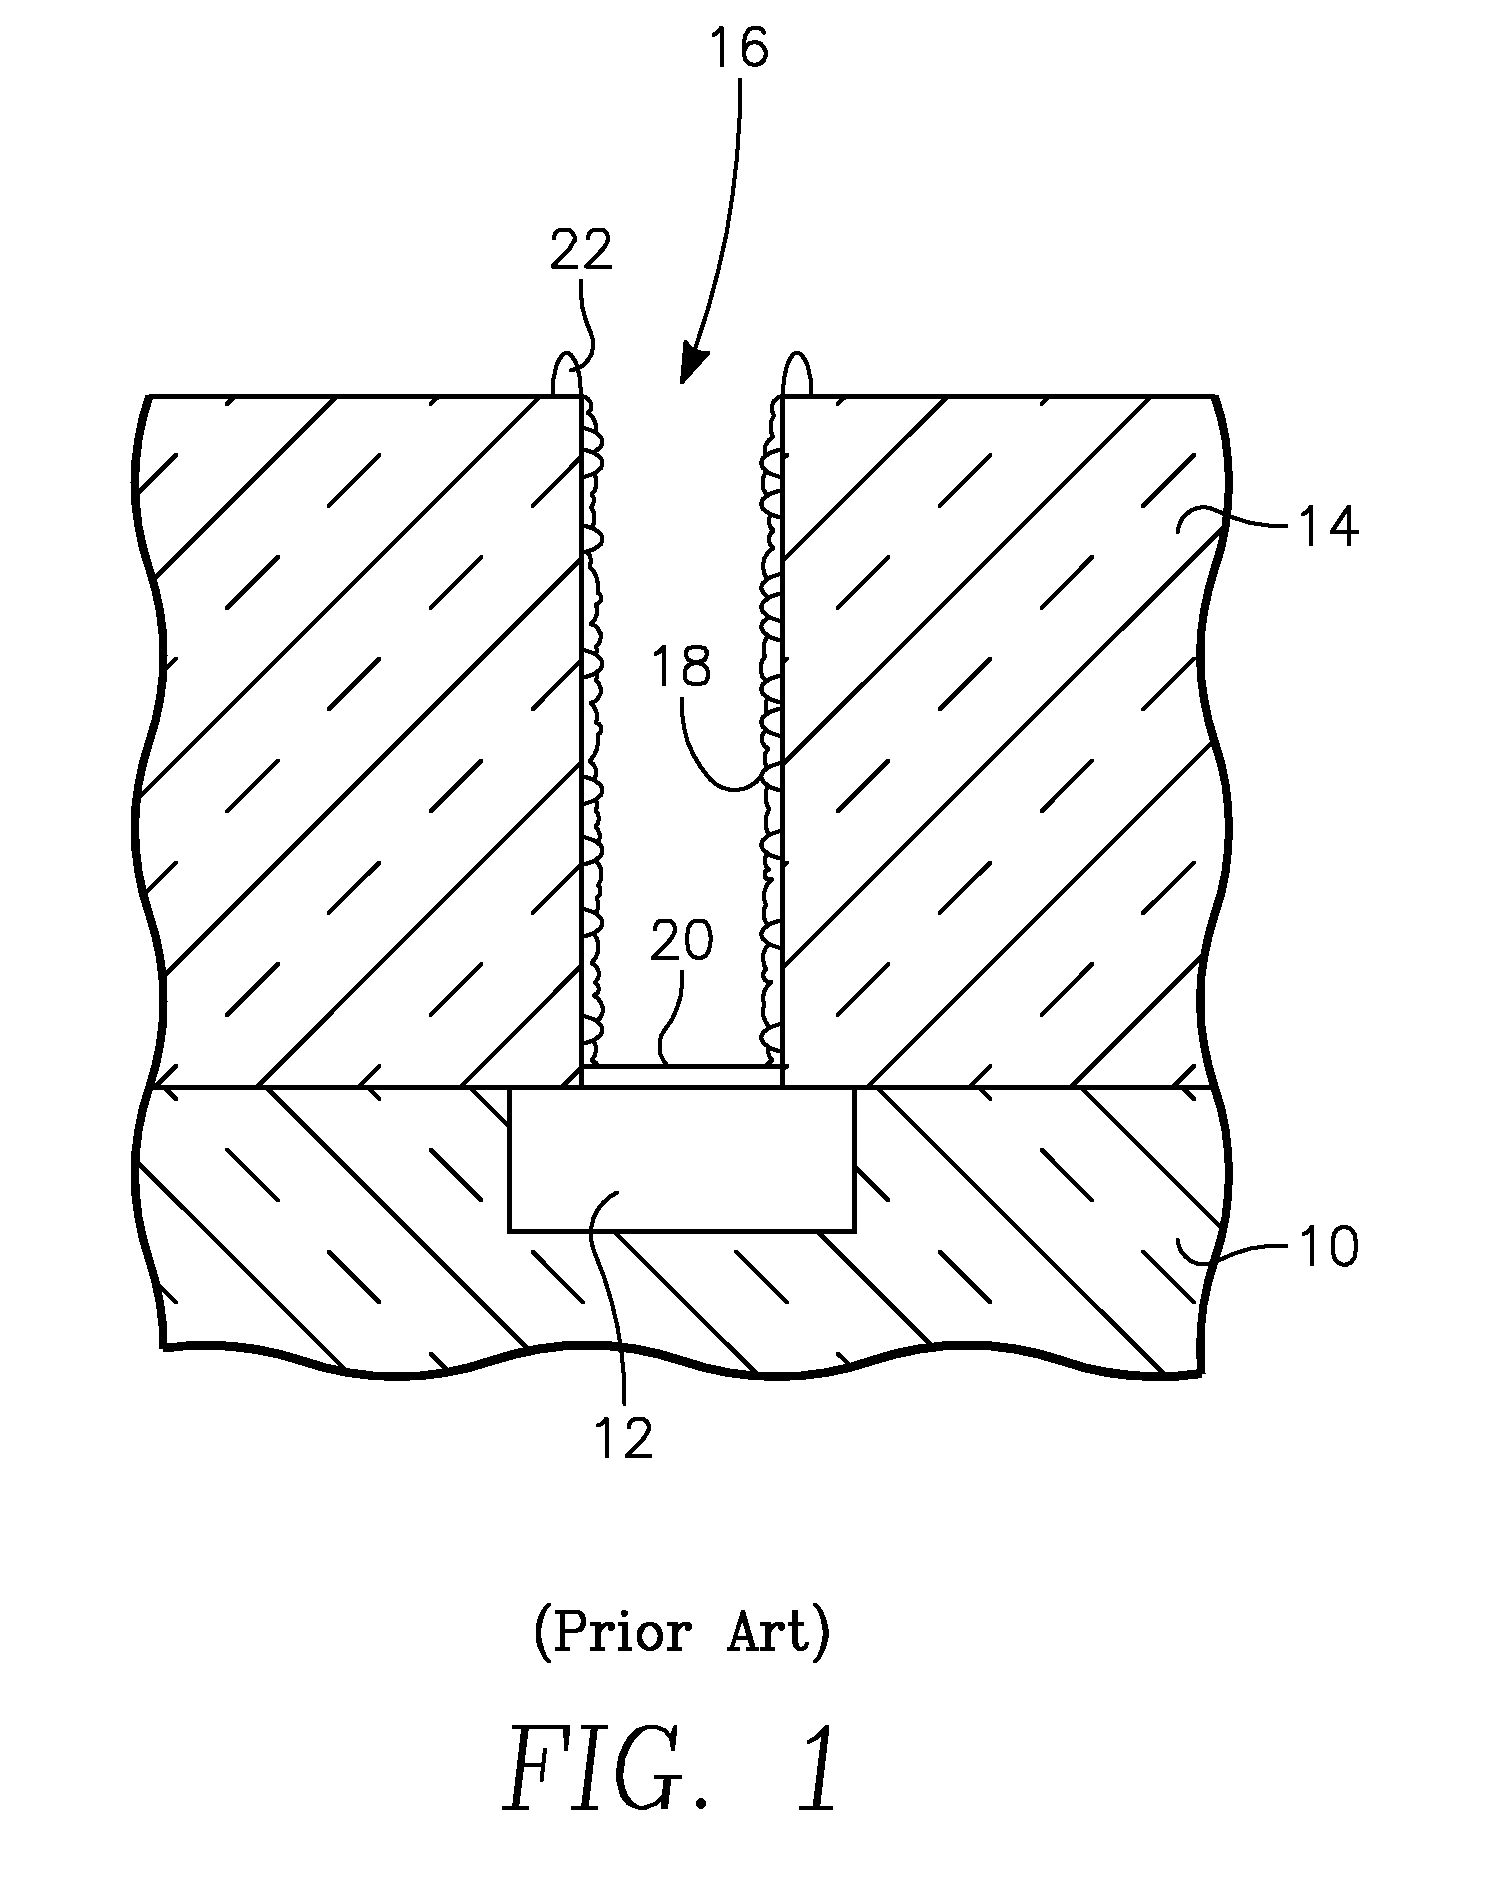 Remote Plasma Source for Pre-Treatment of Substrates Prior to Deposition